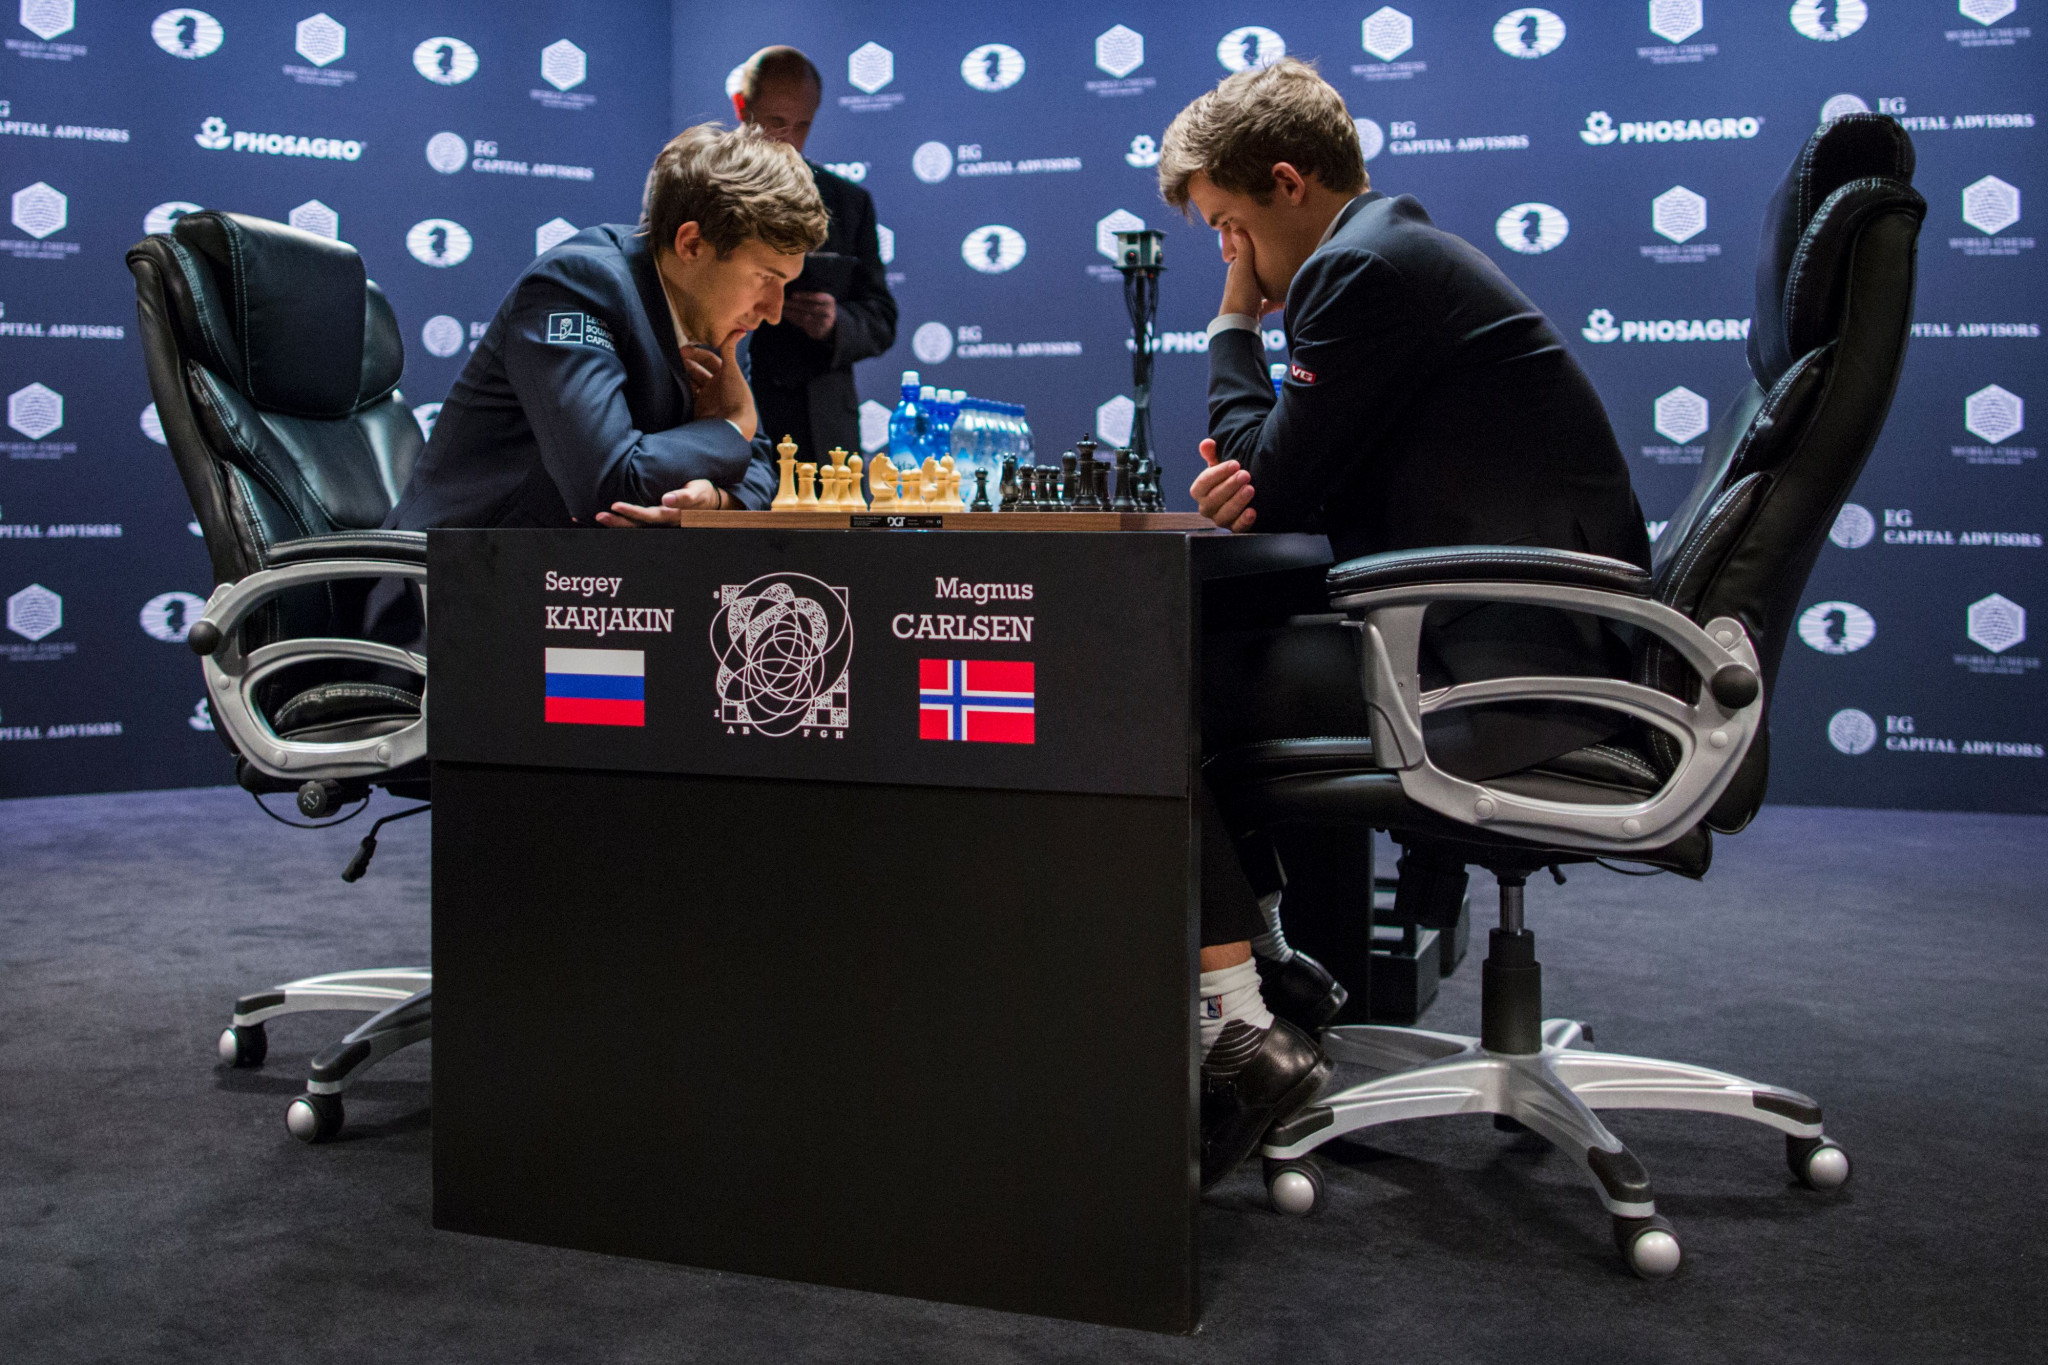 Former World Chess Championships challenger Sergey Karjakin, left, has refused to compete in FIDE events because he cannot compete under the Russian flag ©Getty Images